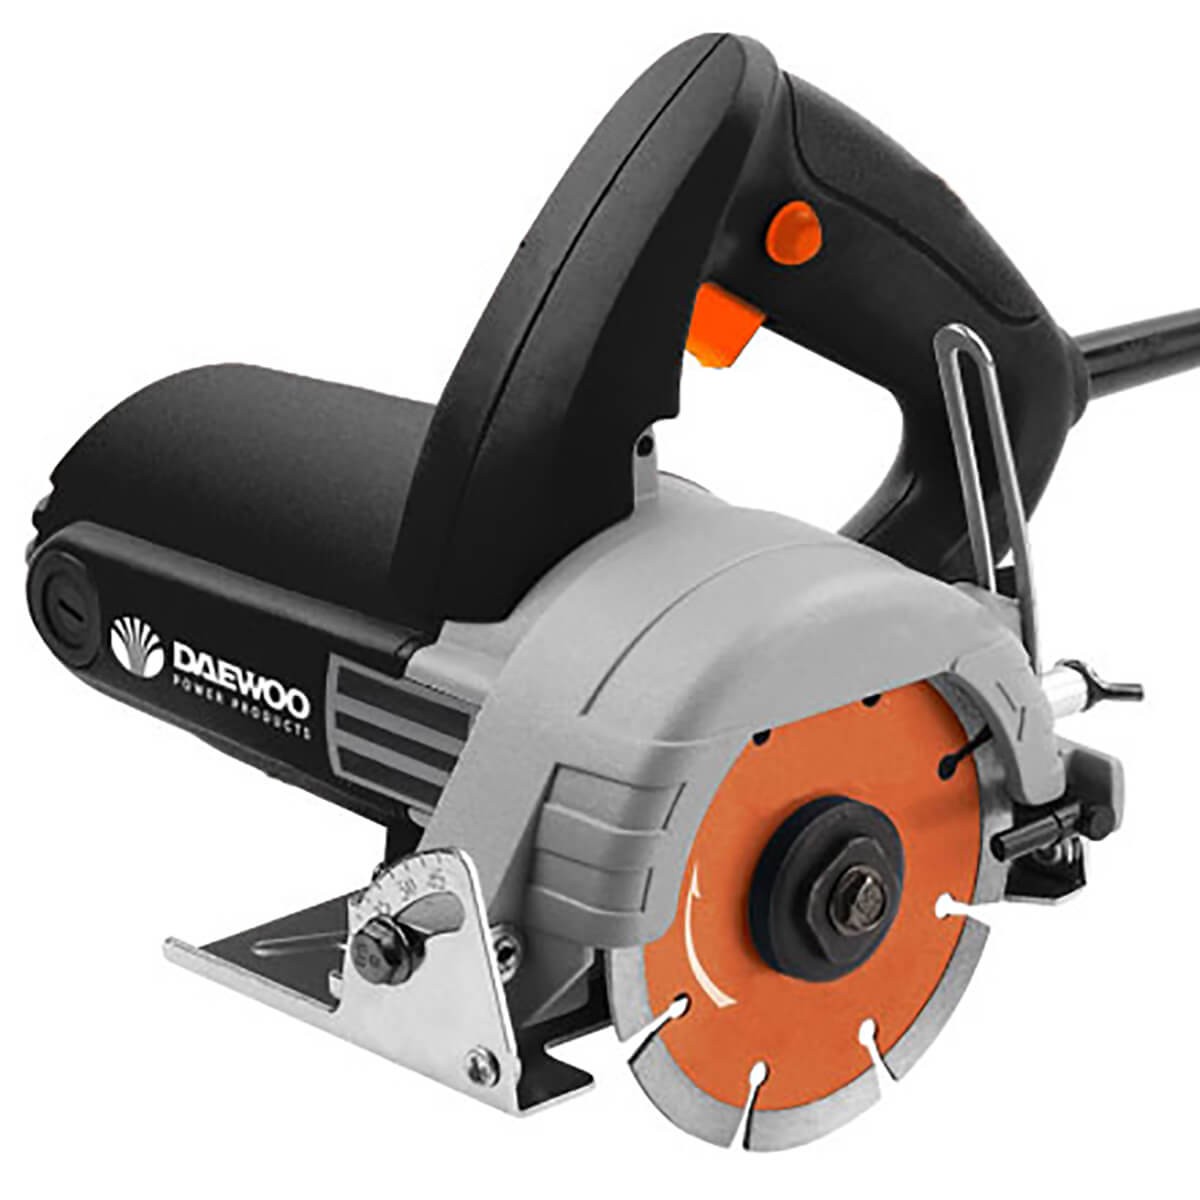 Daewoo 1300W Electric Marble Cutter for Cutting Wood Marble Poli